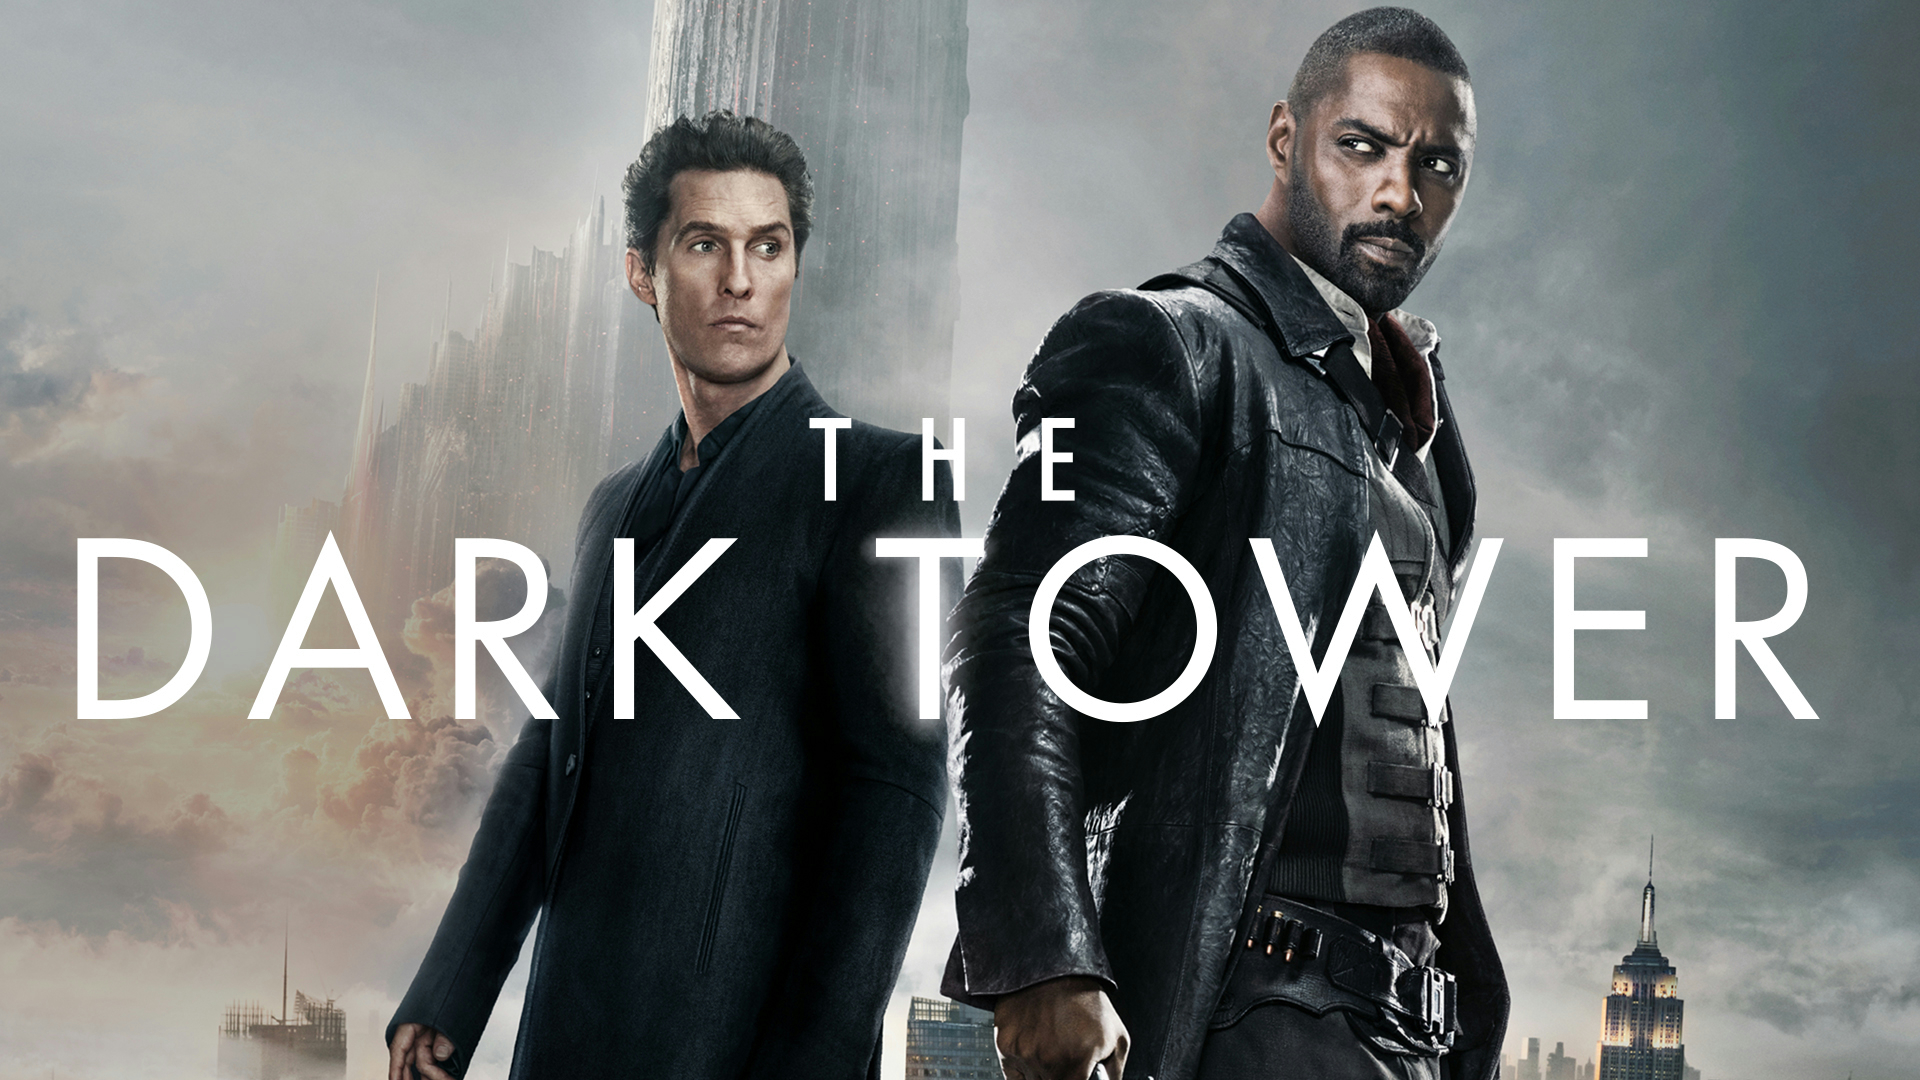 The Dark Tower Movie Poster Wallpapers